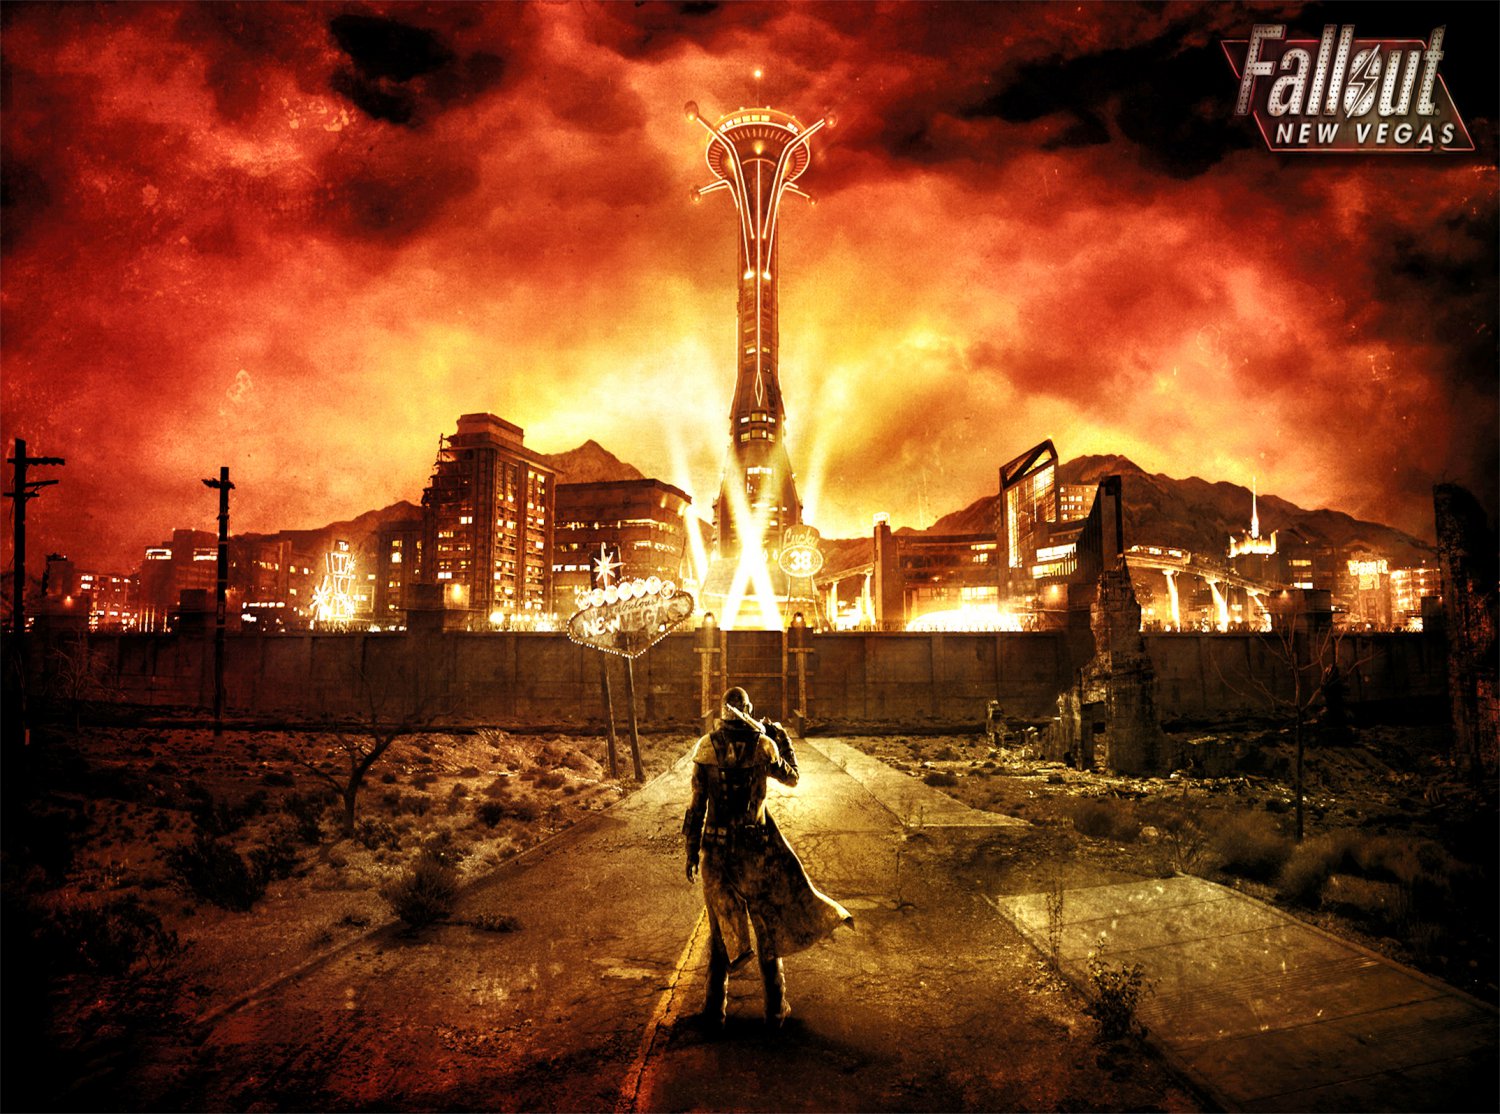 Fallout New Vegas  13"x19" (32cm/49cm) Polyester Fabric Poster